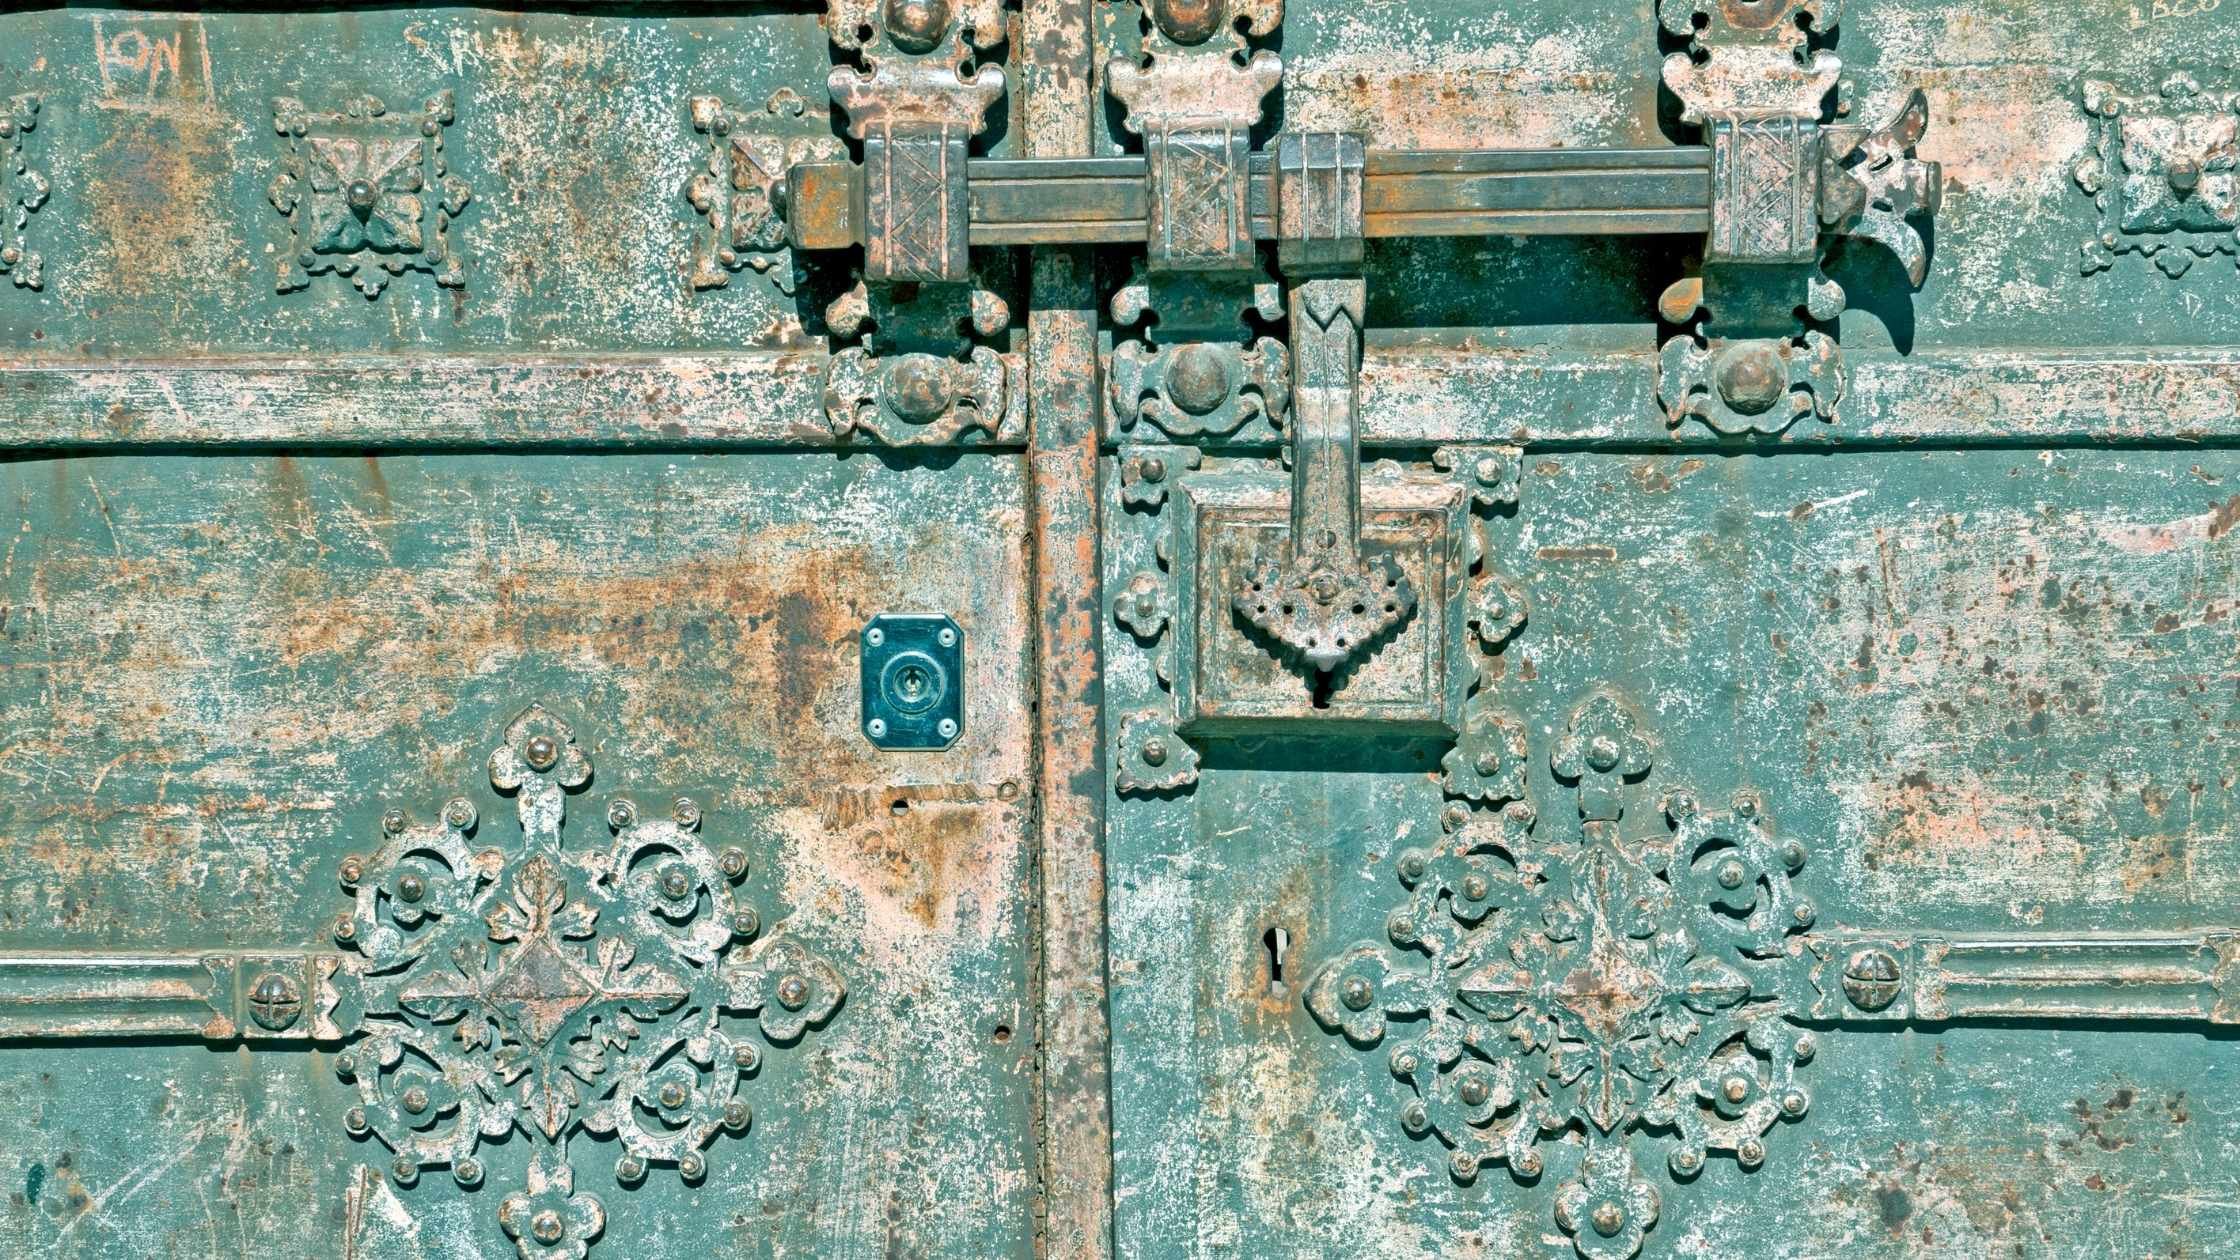 Security concept; old ornate metal gate with multiple locks